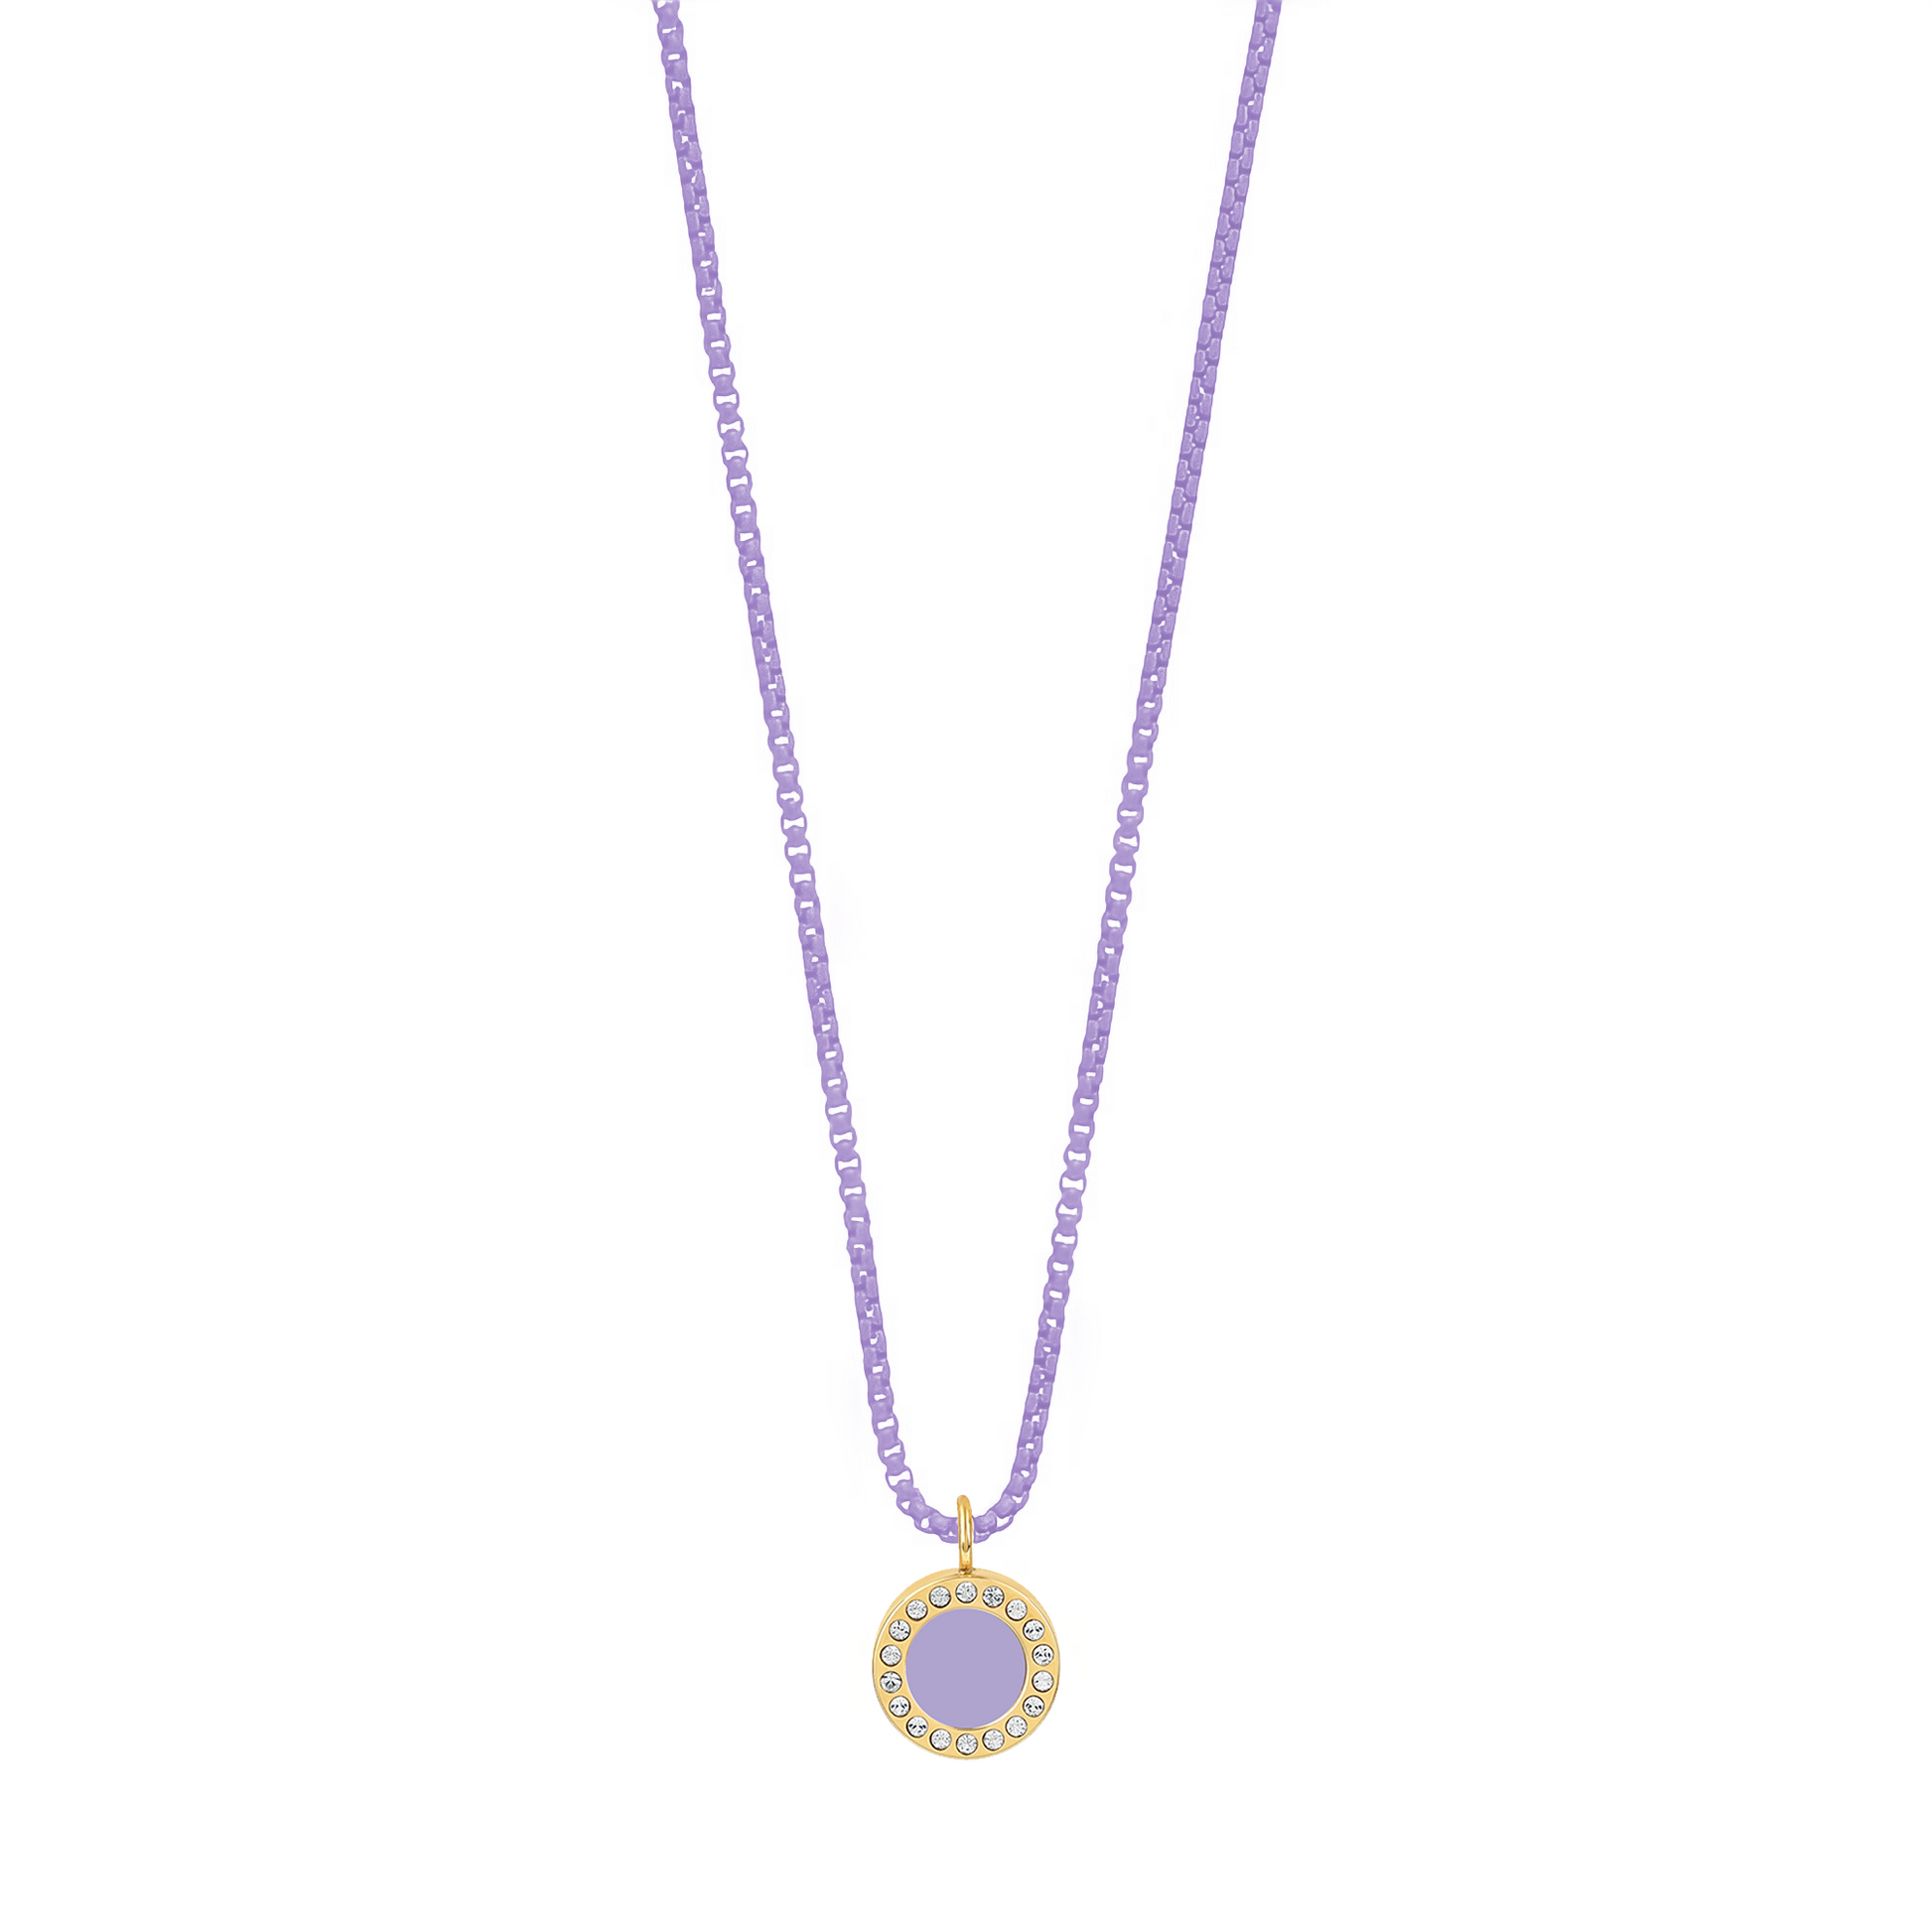 OCEAN LAVENDER CHAIN LAVENDER CHIP WITH ZIRCONIA NECKLACE